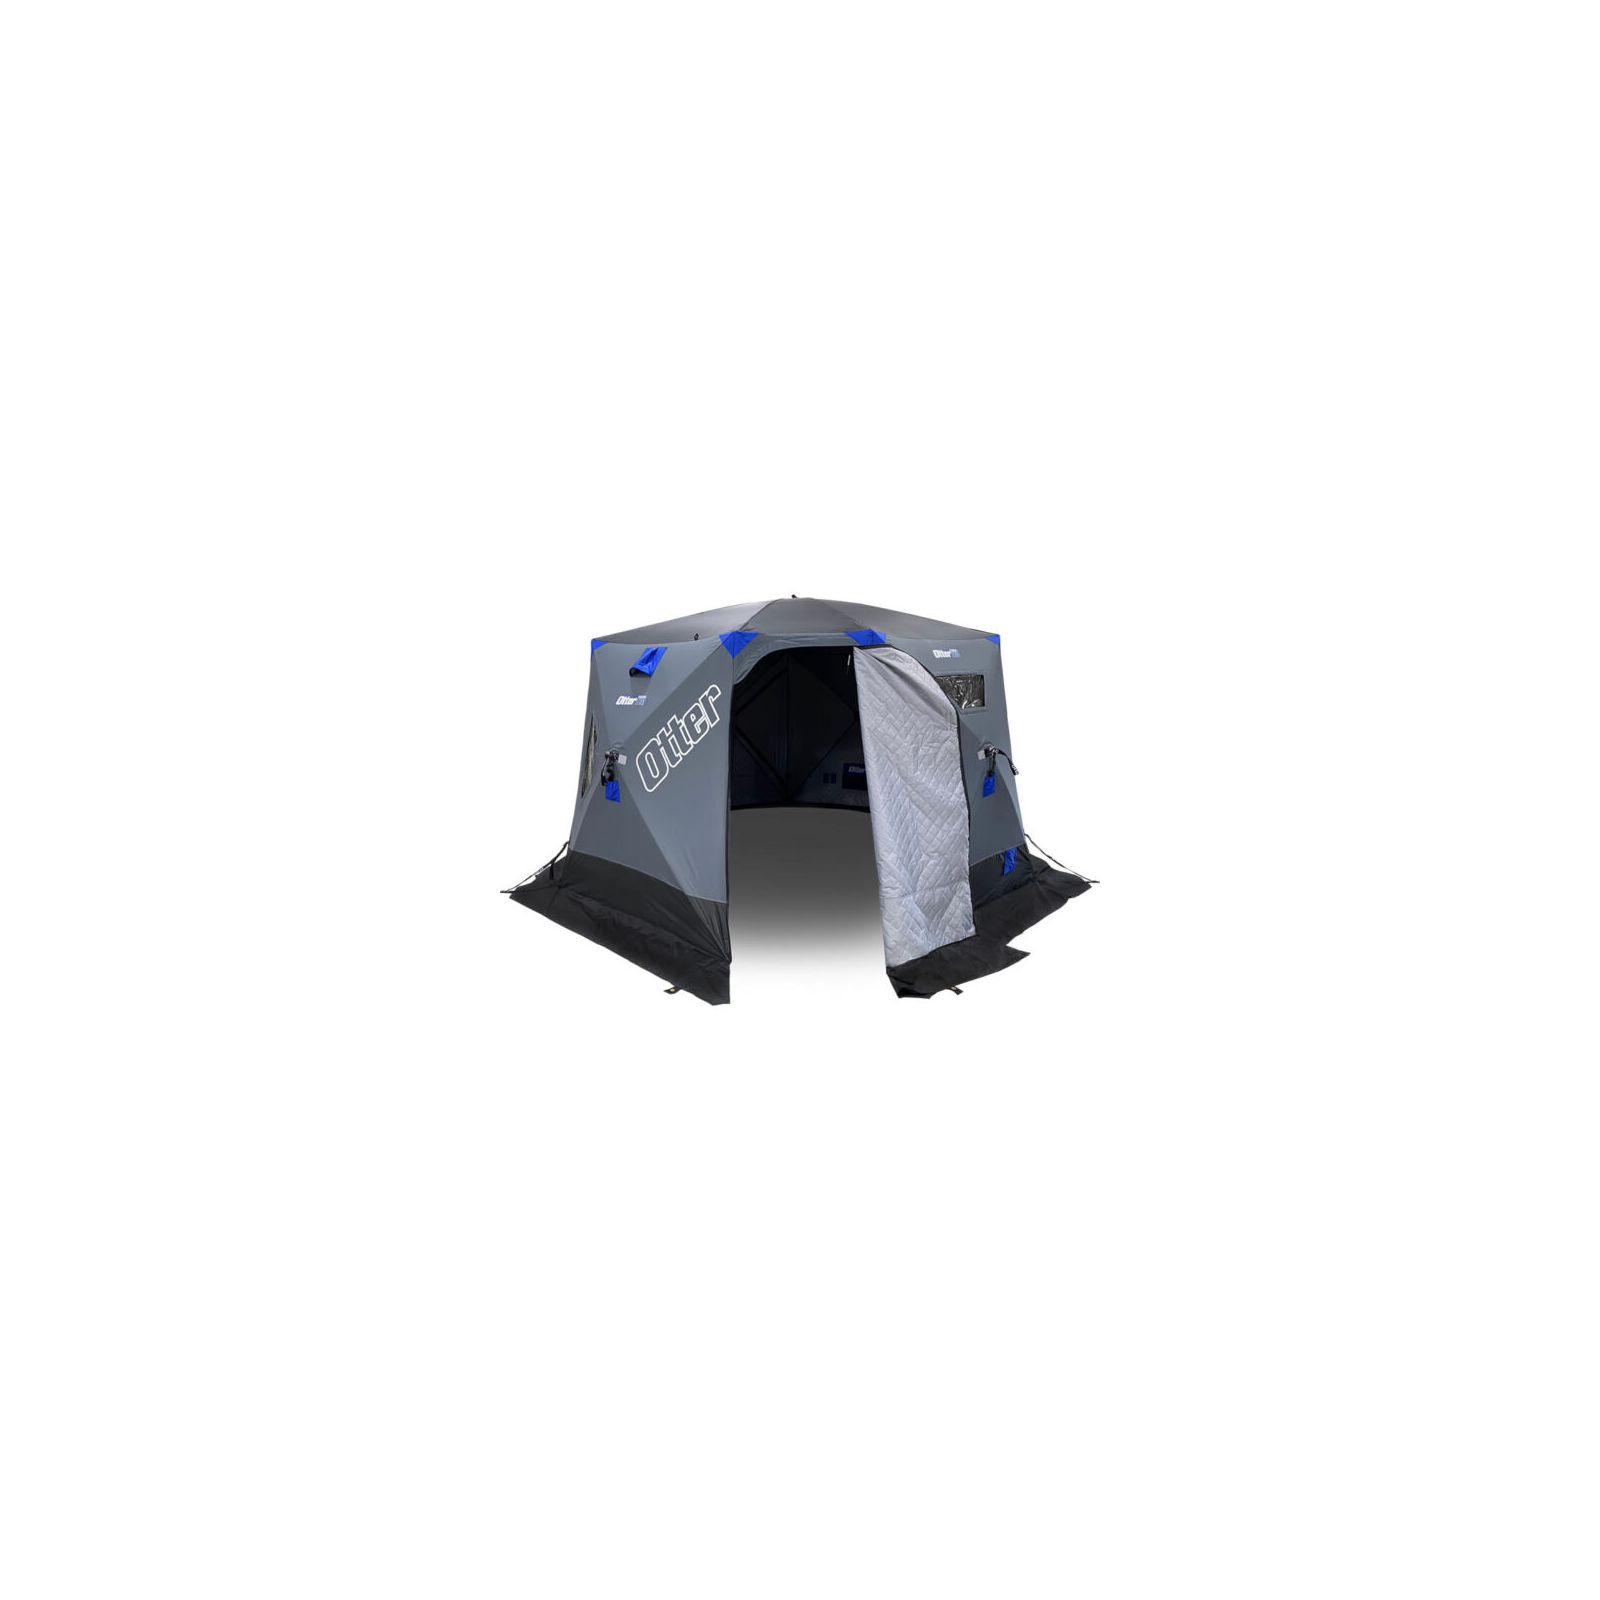 Otter Outdoors VORTEX Pro Thermal Hub Shelter